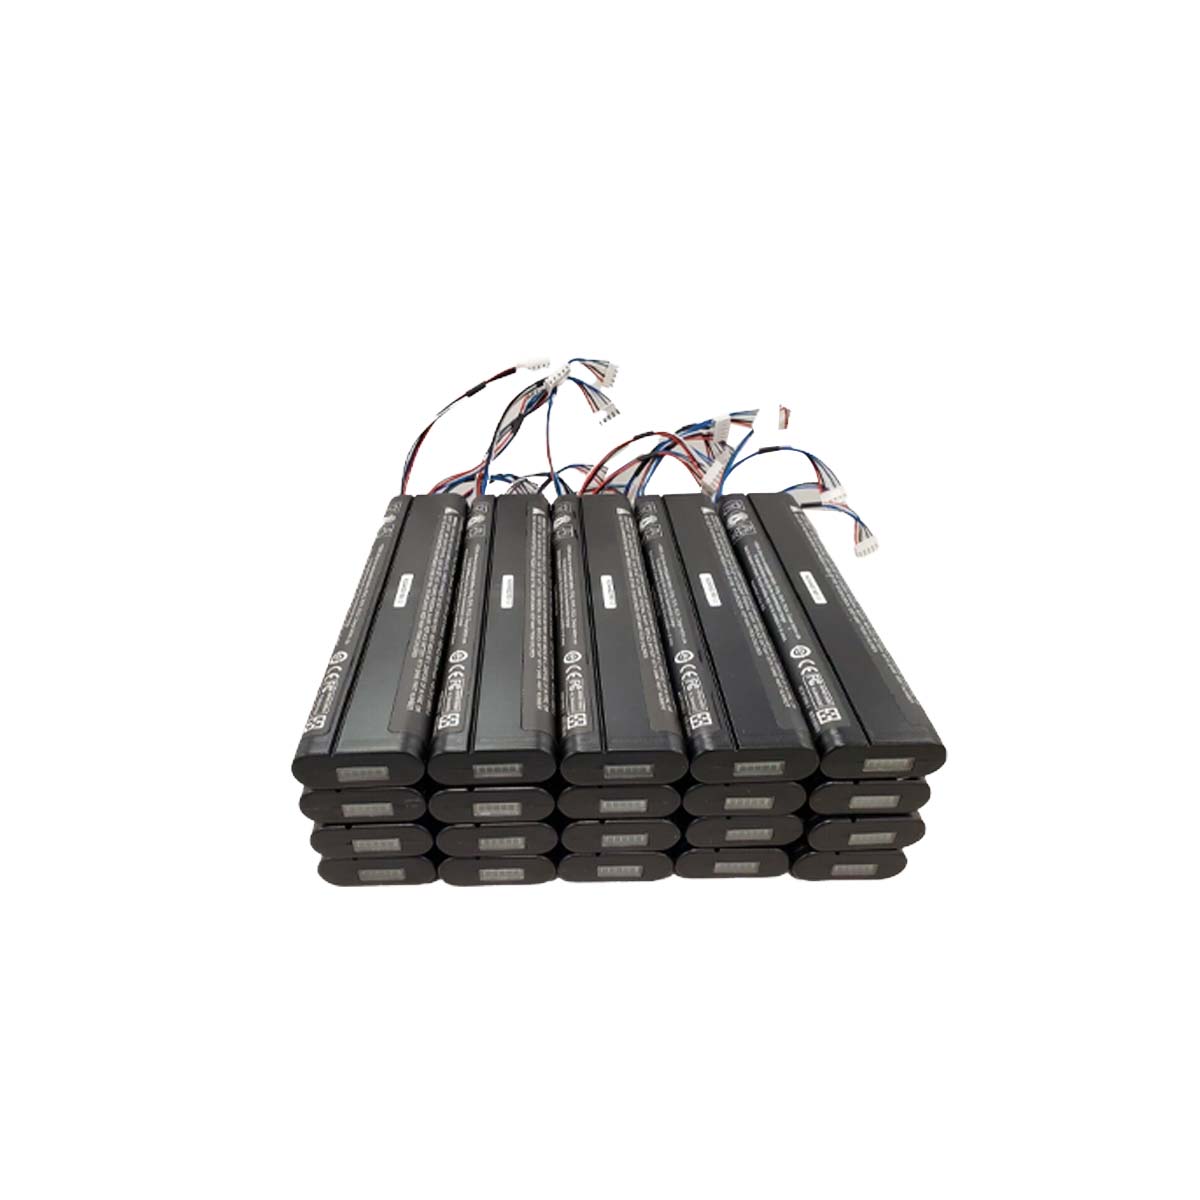 New In stock for sale, SANYO Battery 20-8 -Cell